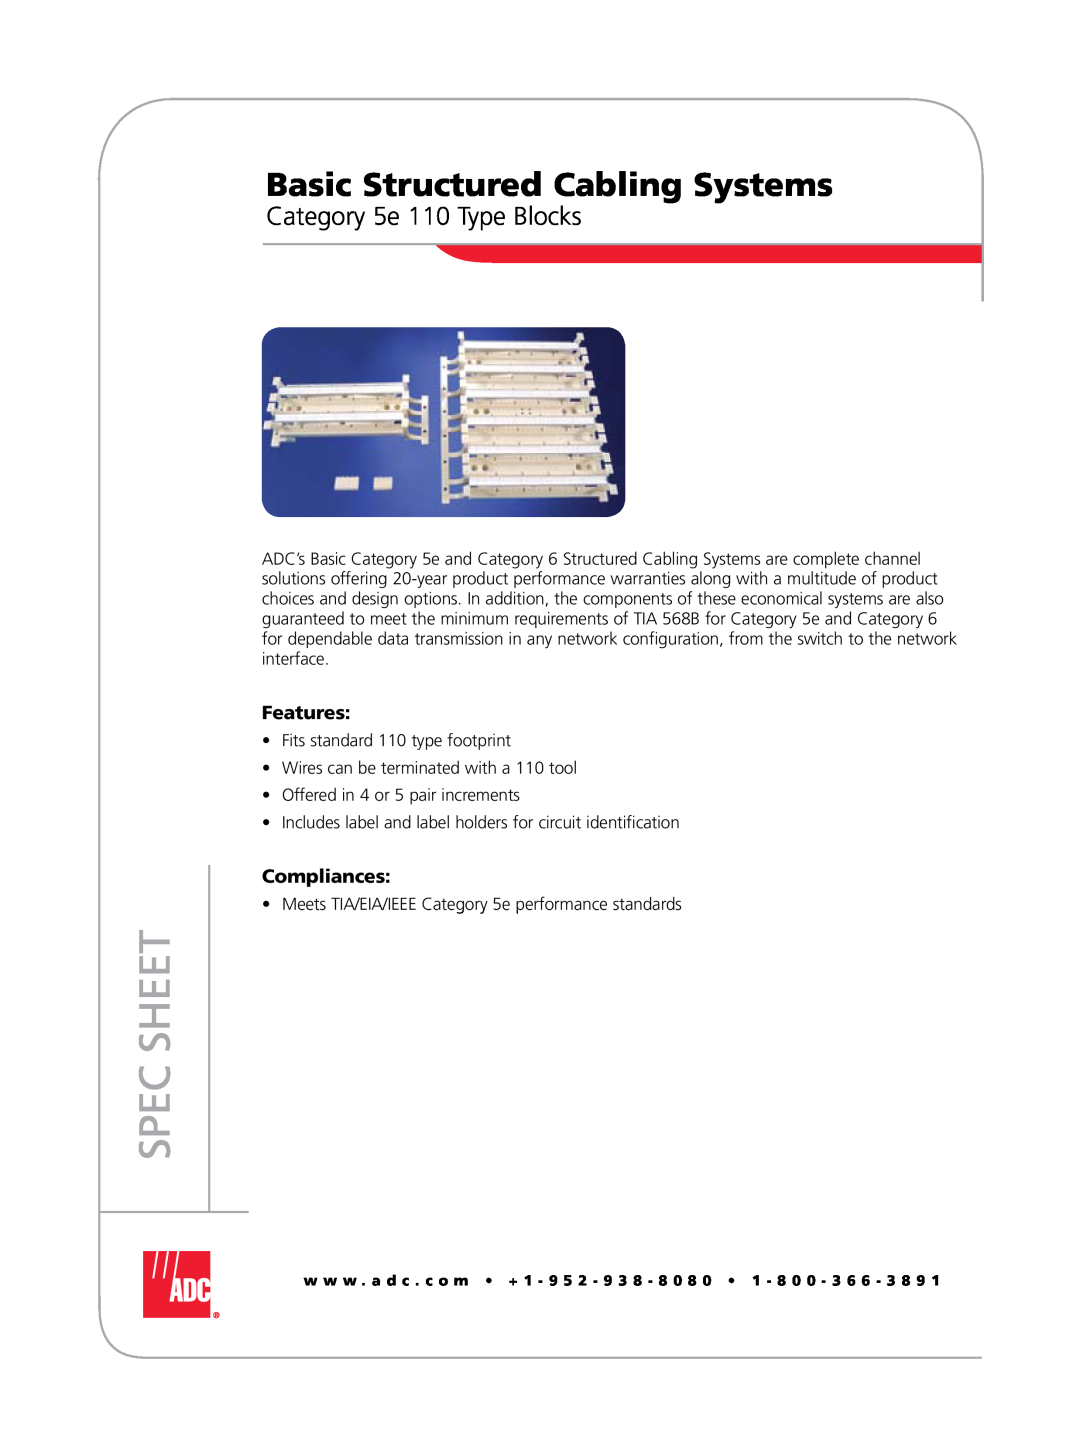 ADC manual Category 5e 110 Type Blocks, Spec Sheet, Basic Structured Cabling Systems, Features, Compliances 